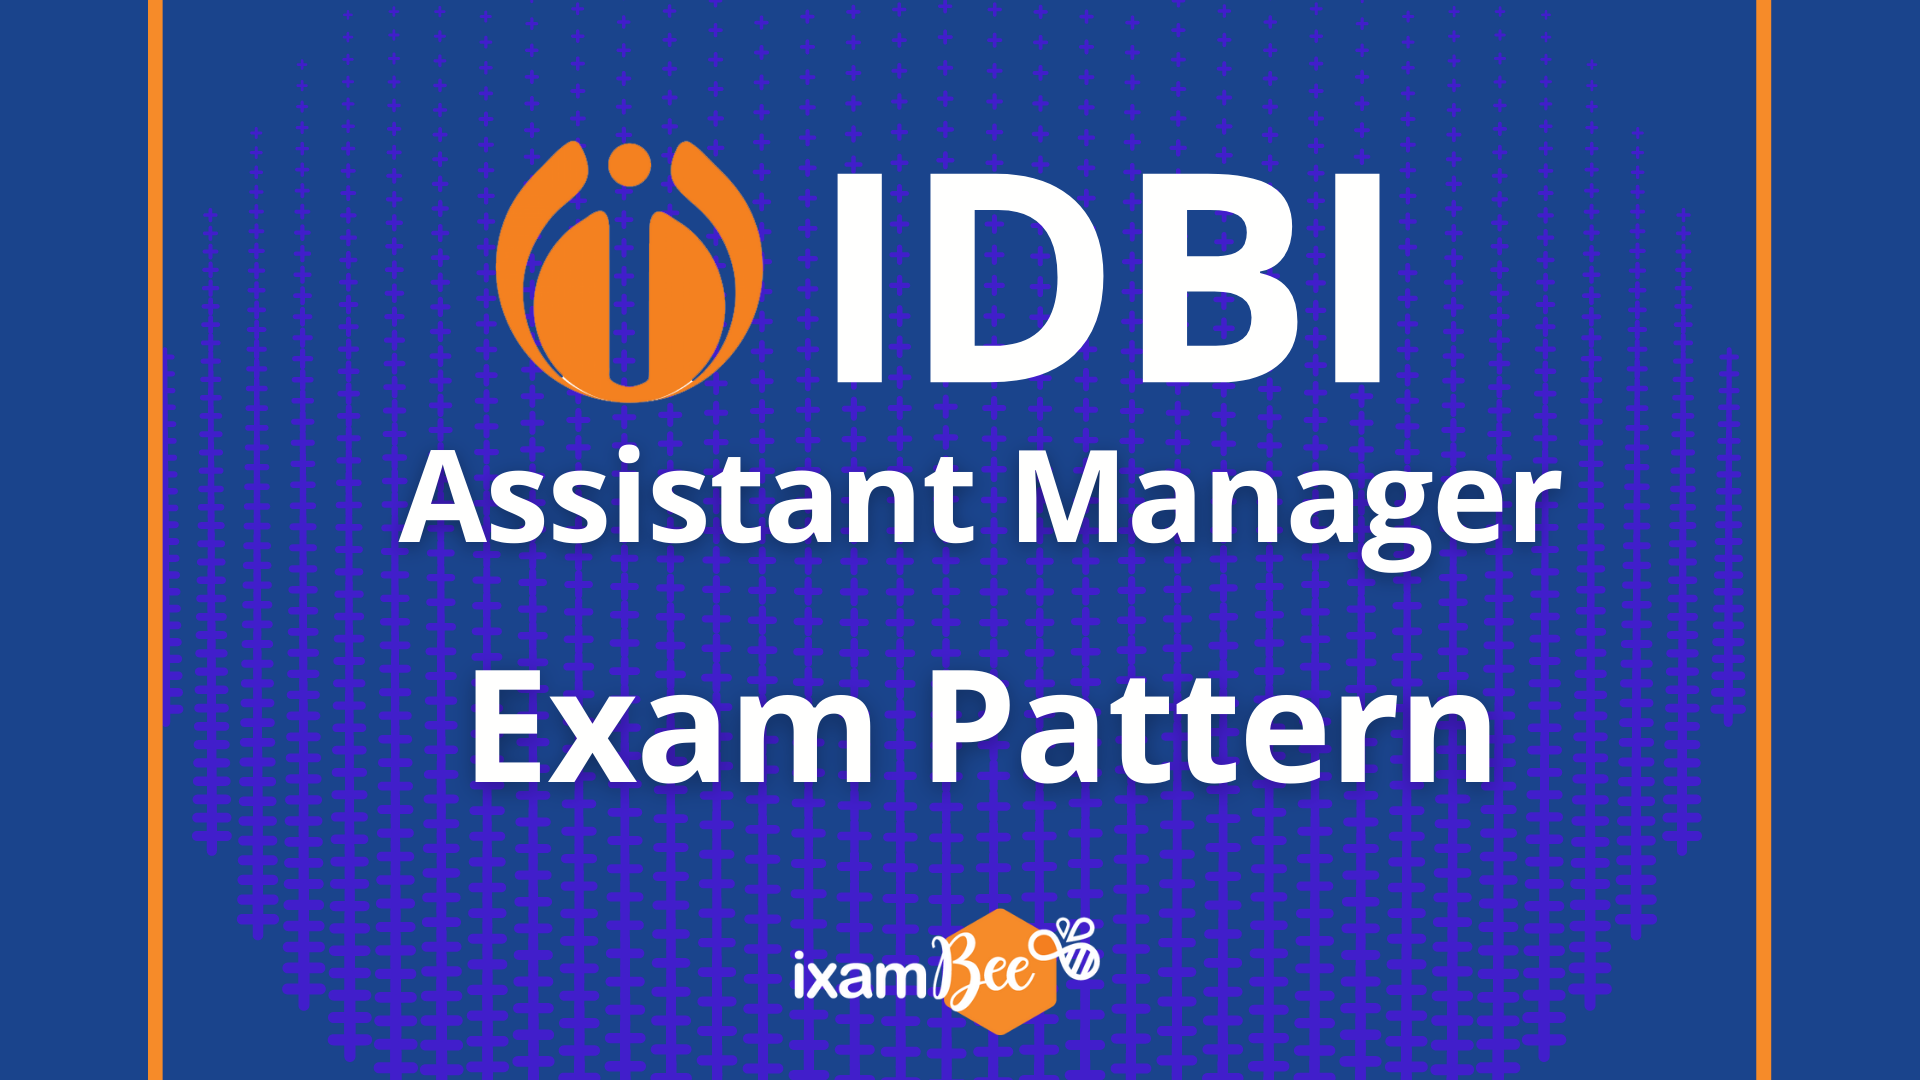 IDBI Assistant Manager Exam Pattern